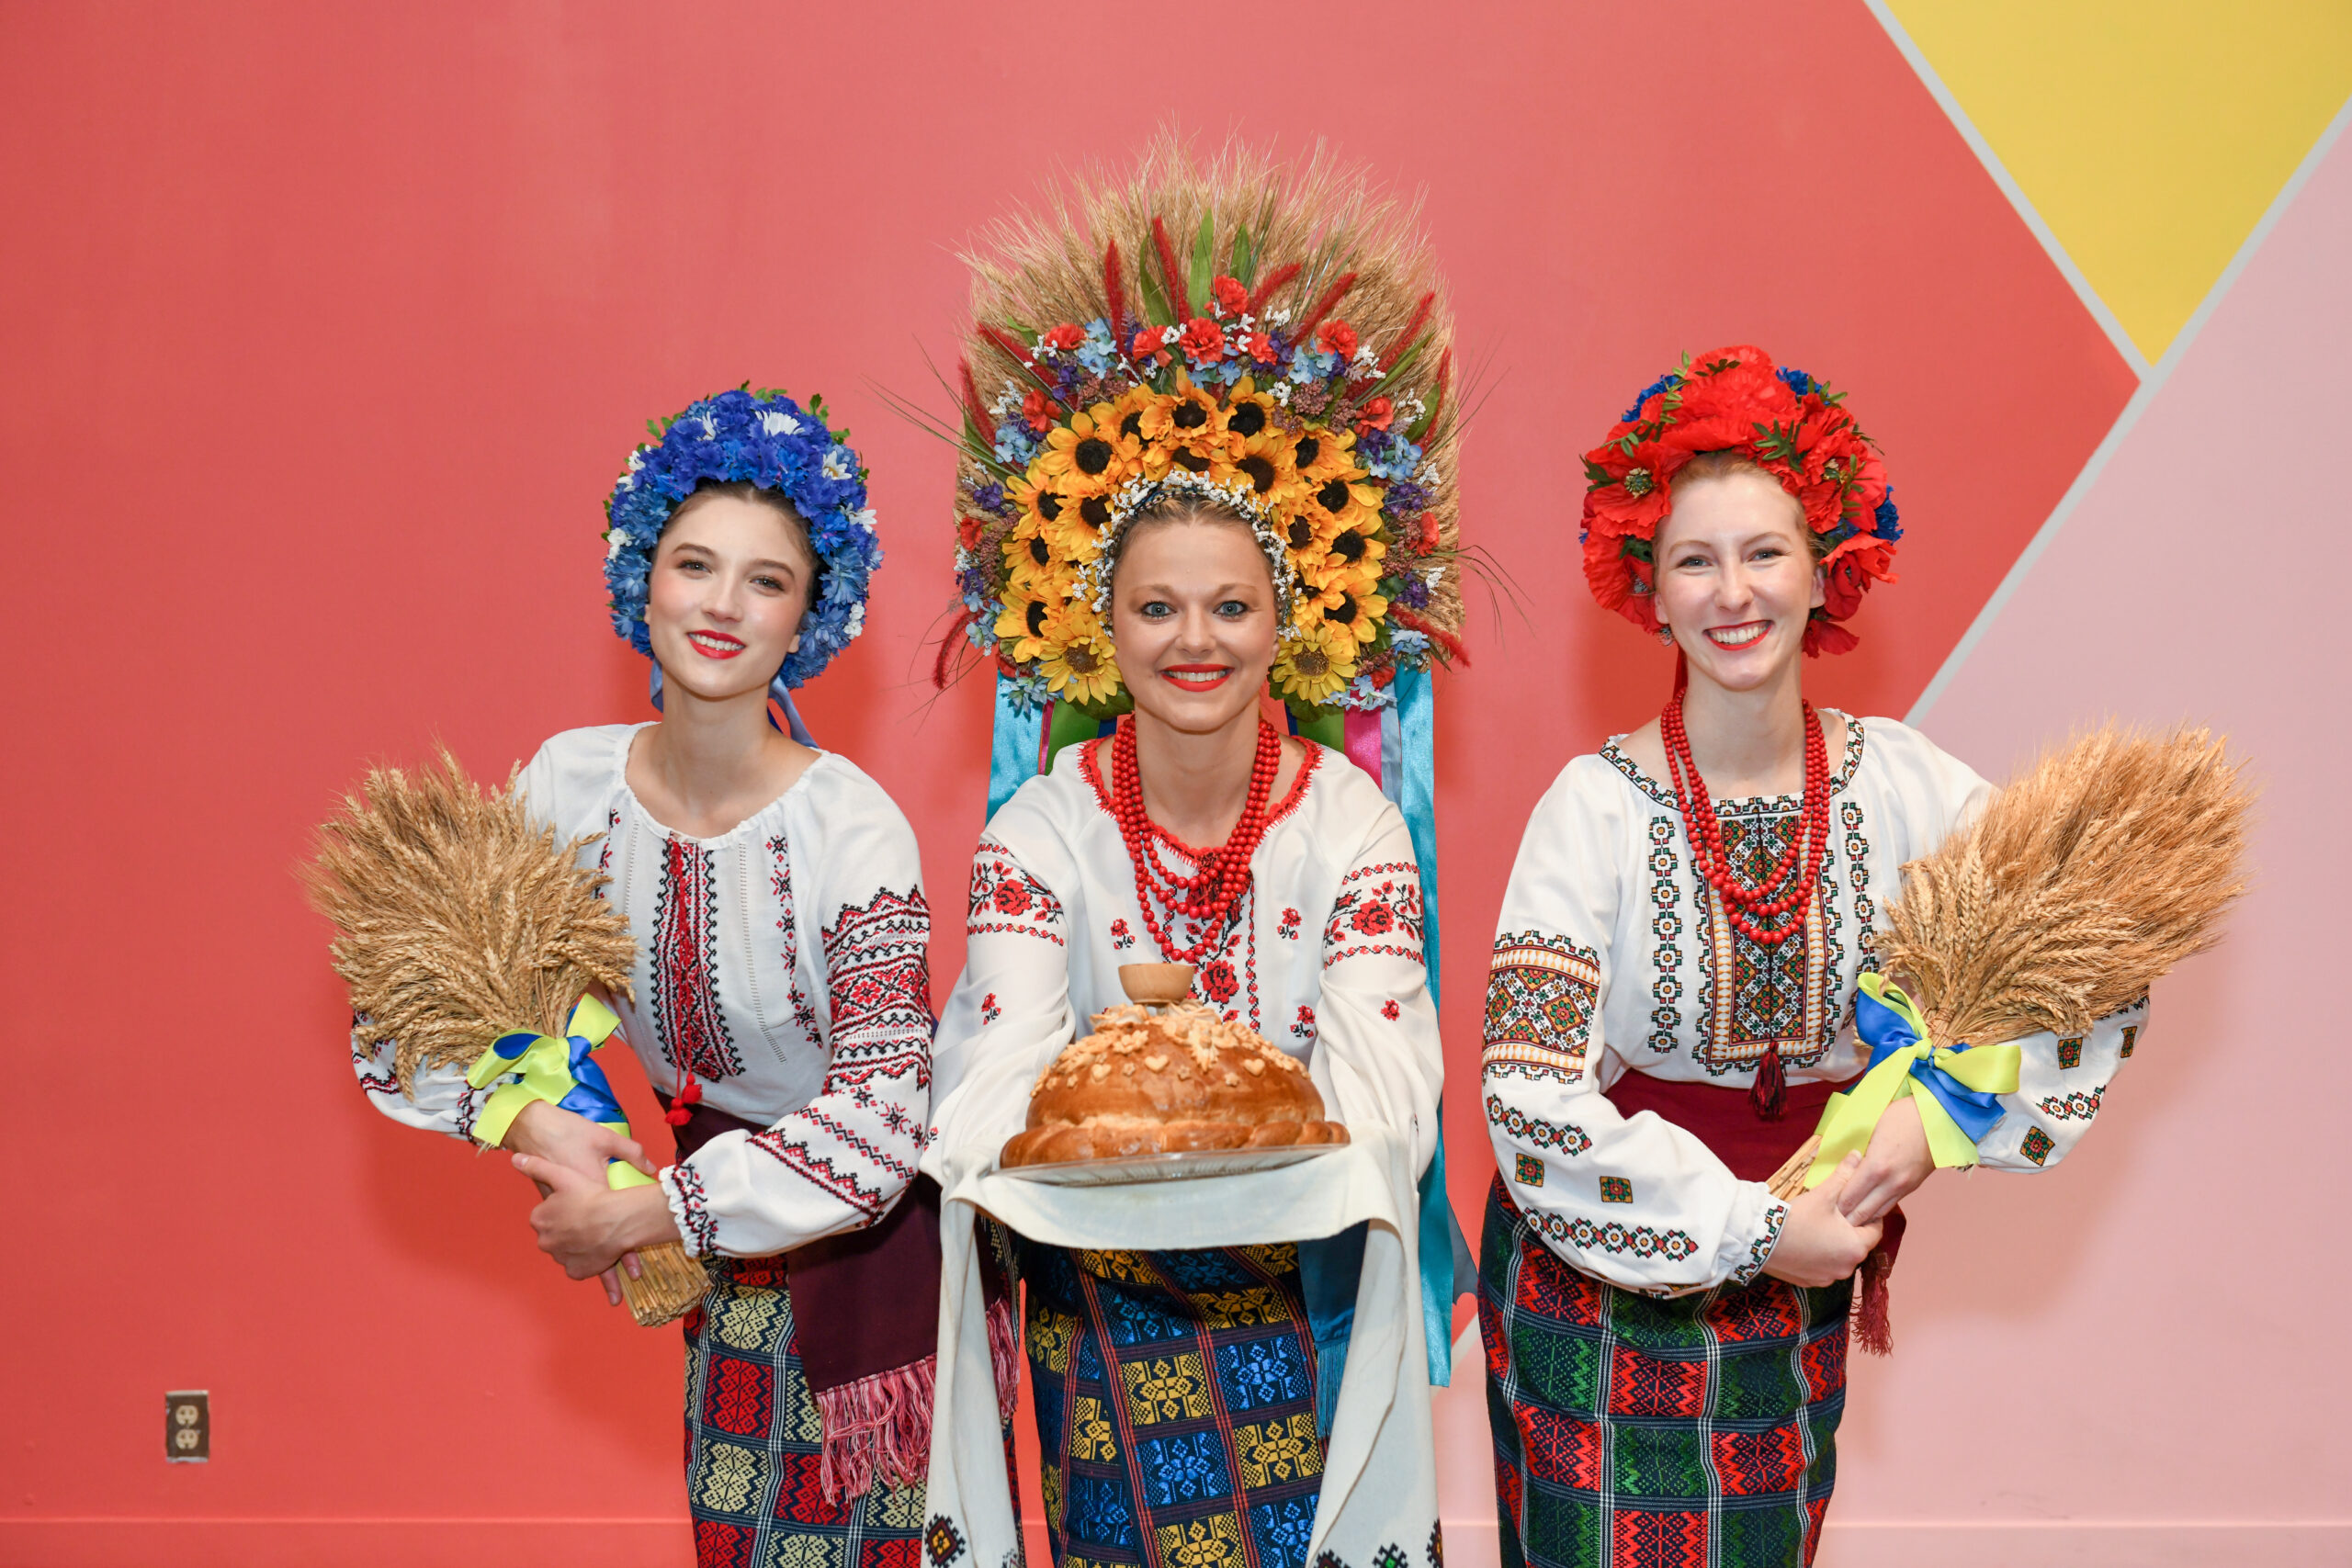 Three dancers pose. The one in the middle holds a bread offering and the two on the sides hold bundles of wheat.